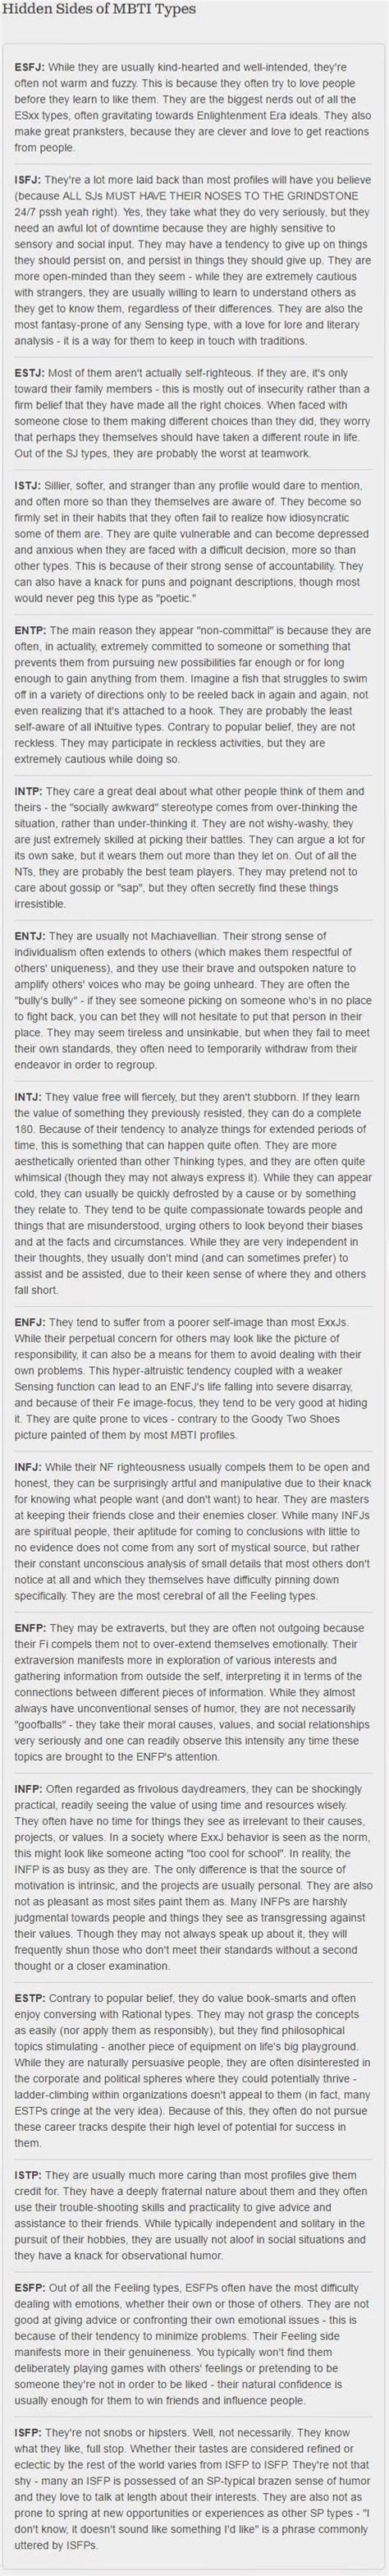 Accurate Descriptions Of The Myers Briggs Types Infj Infp Mbti